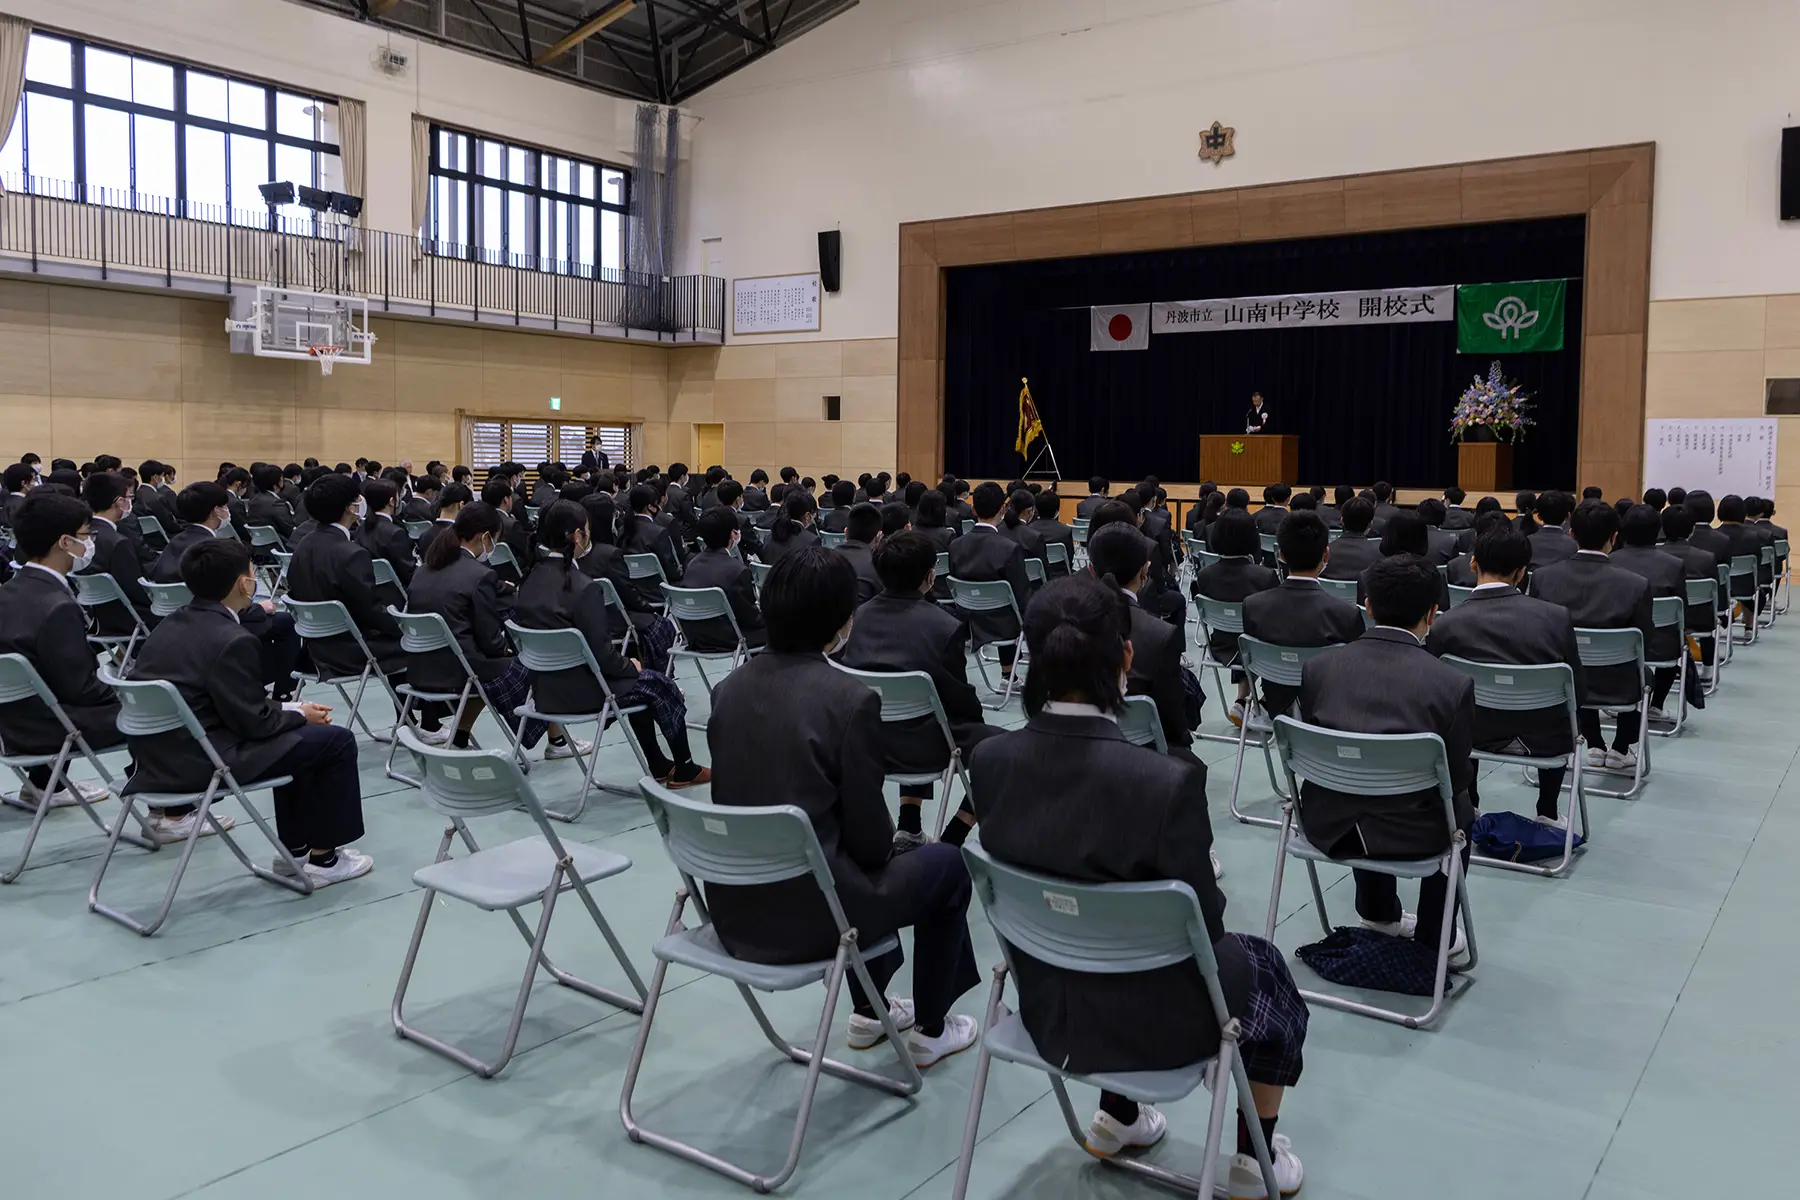 Students sitting in rows in an assembly hall facing the stage